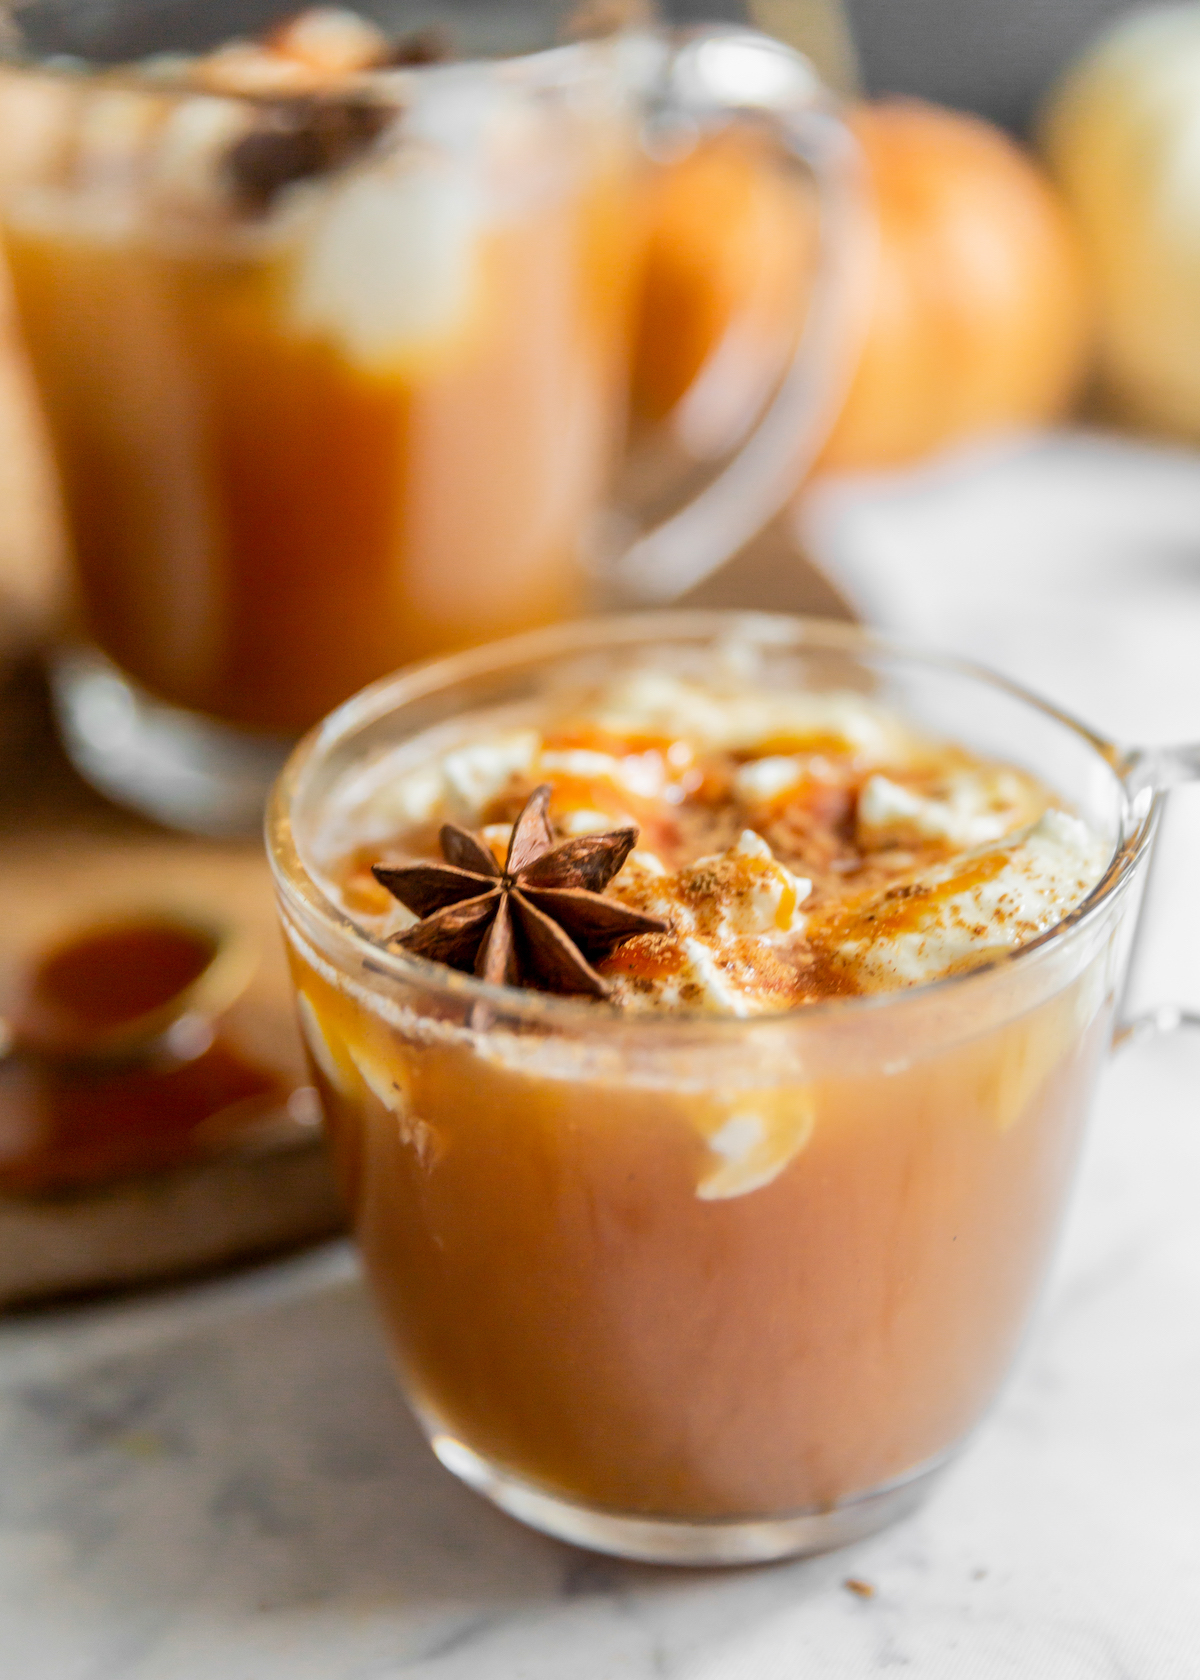 A glass of warm cider with caramel sauce.